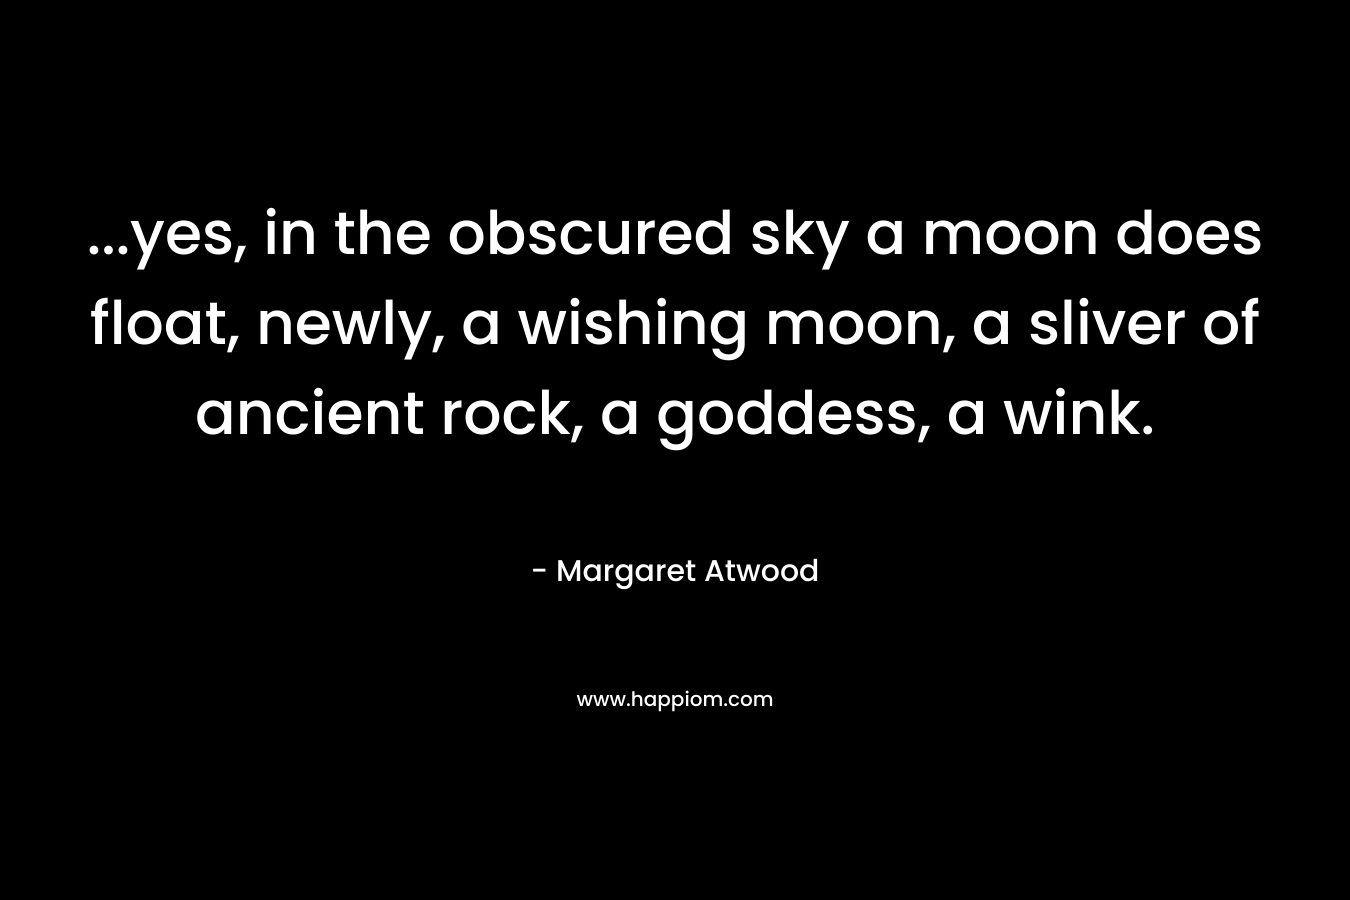 ...yes, in the obscured sky a moon does float, newly, a wishing moon, a sliver of ancient rock, a goddess, a wink.